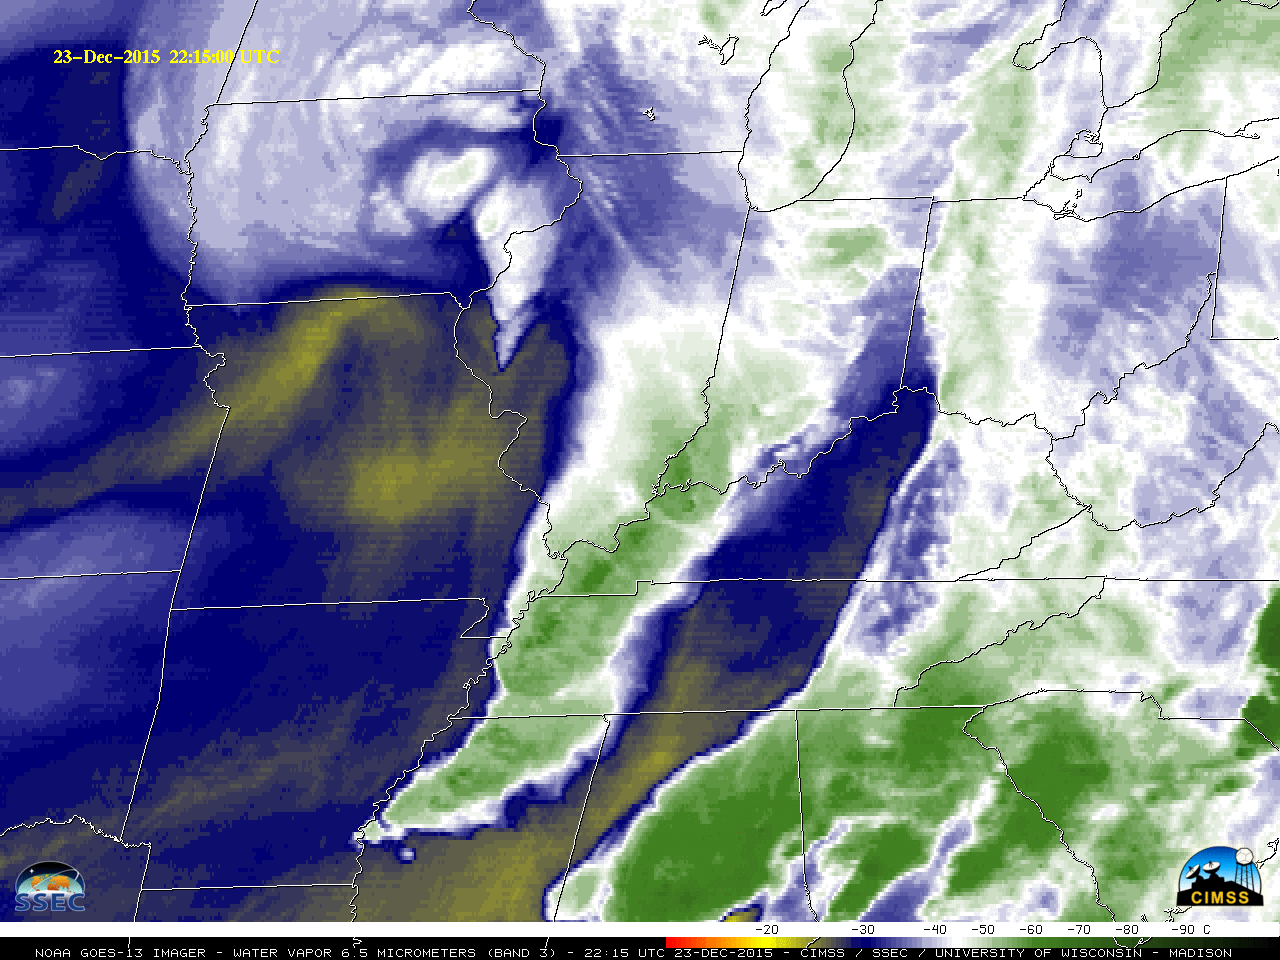 GOES-13 Water Vapor (6.5 µm) images [click to play animation]